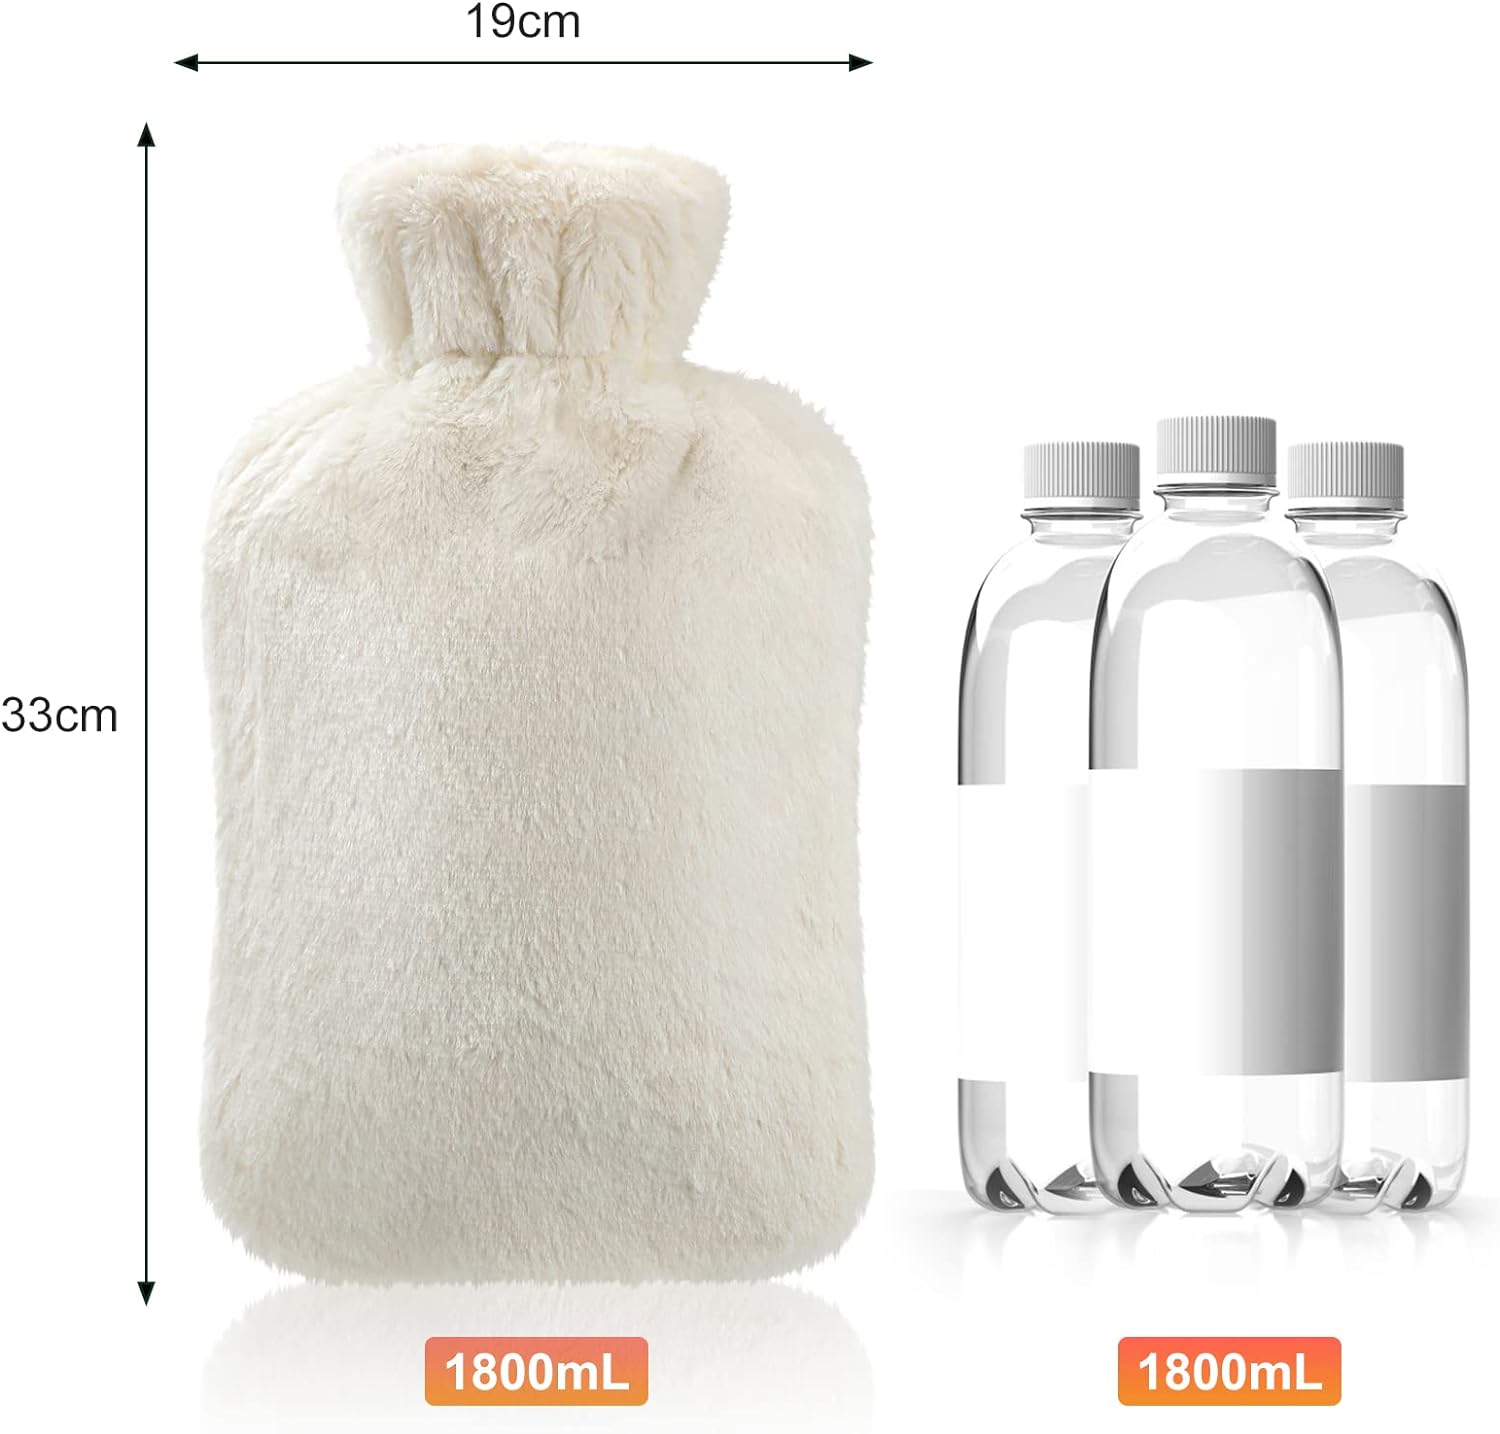 Hot Water Bottle with Cover, 2L Large Capacity, Premium Natural Rubber Hot Water Bag Cover 34509